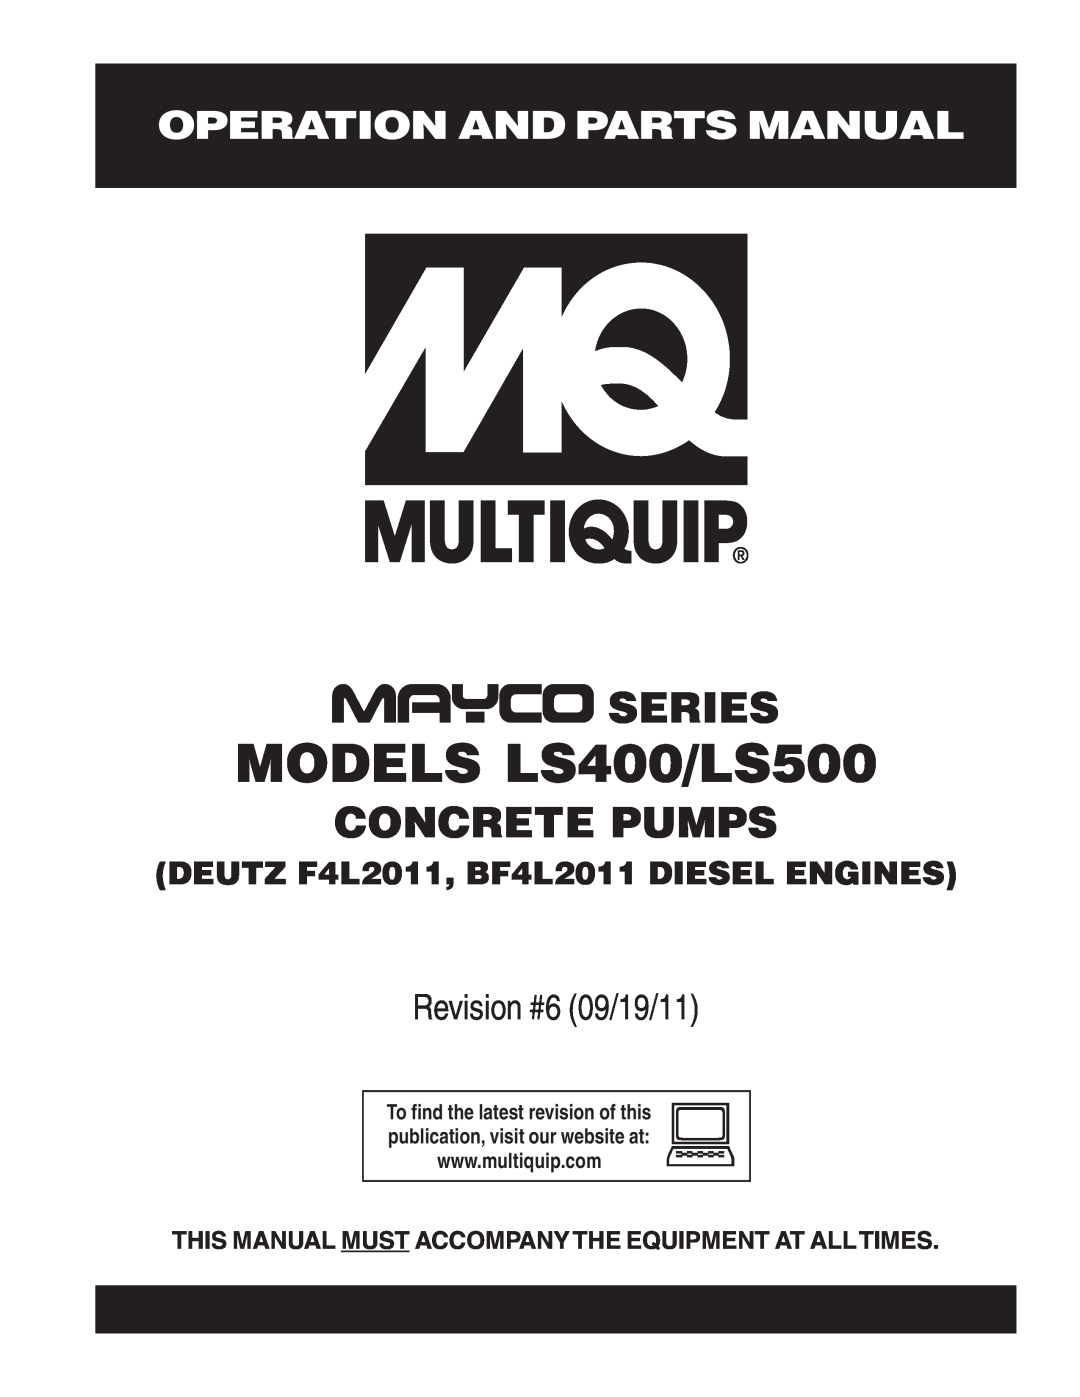 Multiquip LS500, LS400 manual Operation And Parts Manual, This Manual Must Accompany The Equipment At Alltimes, Series 